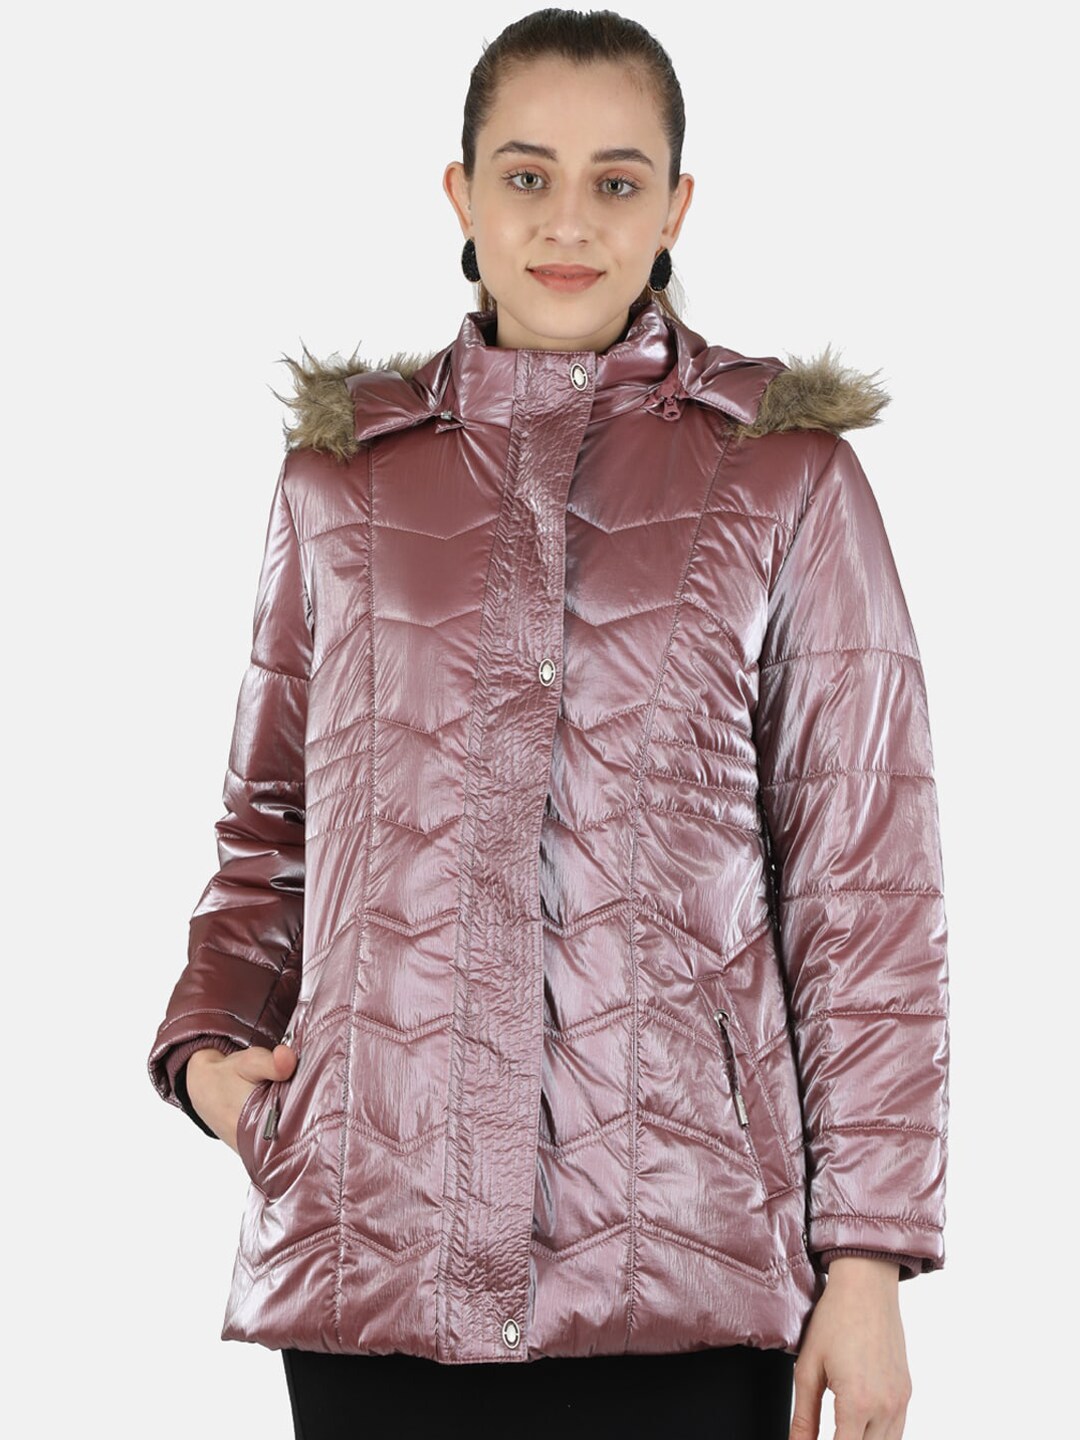 Monte Carlo Women Pink Lightweight Longline Cotton Parka Jacket with Faux Fur Trim Price in India